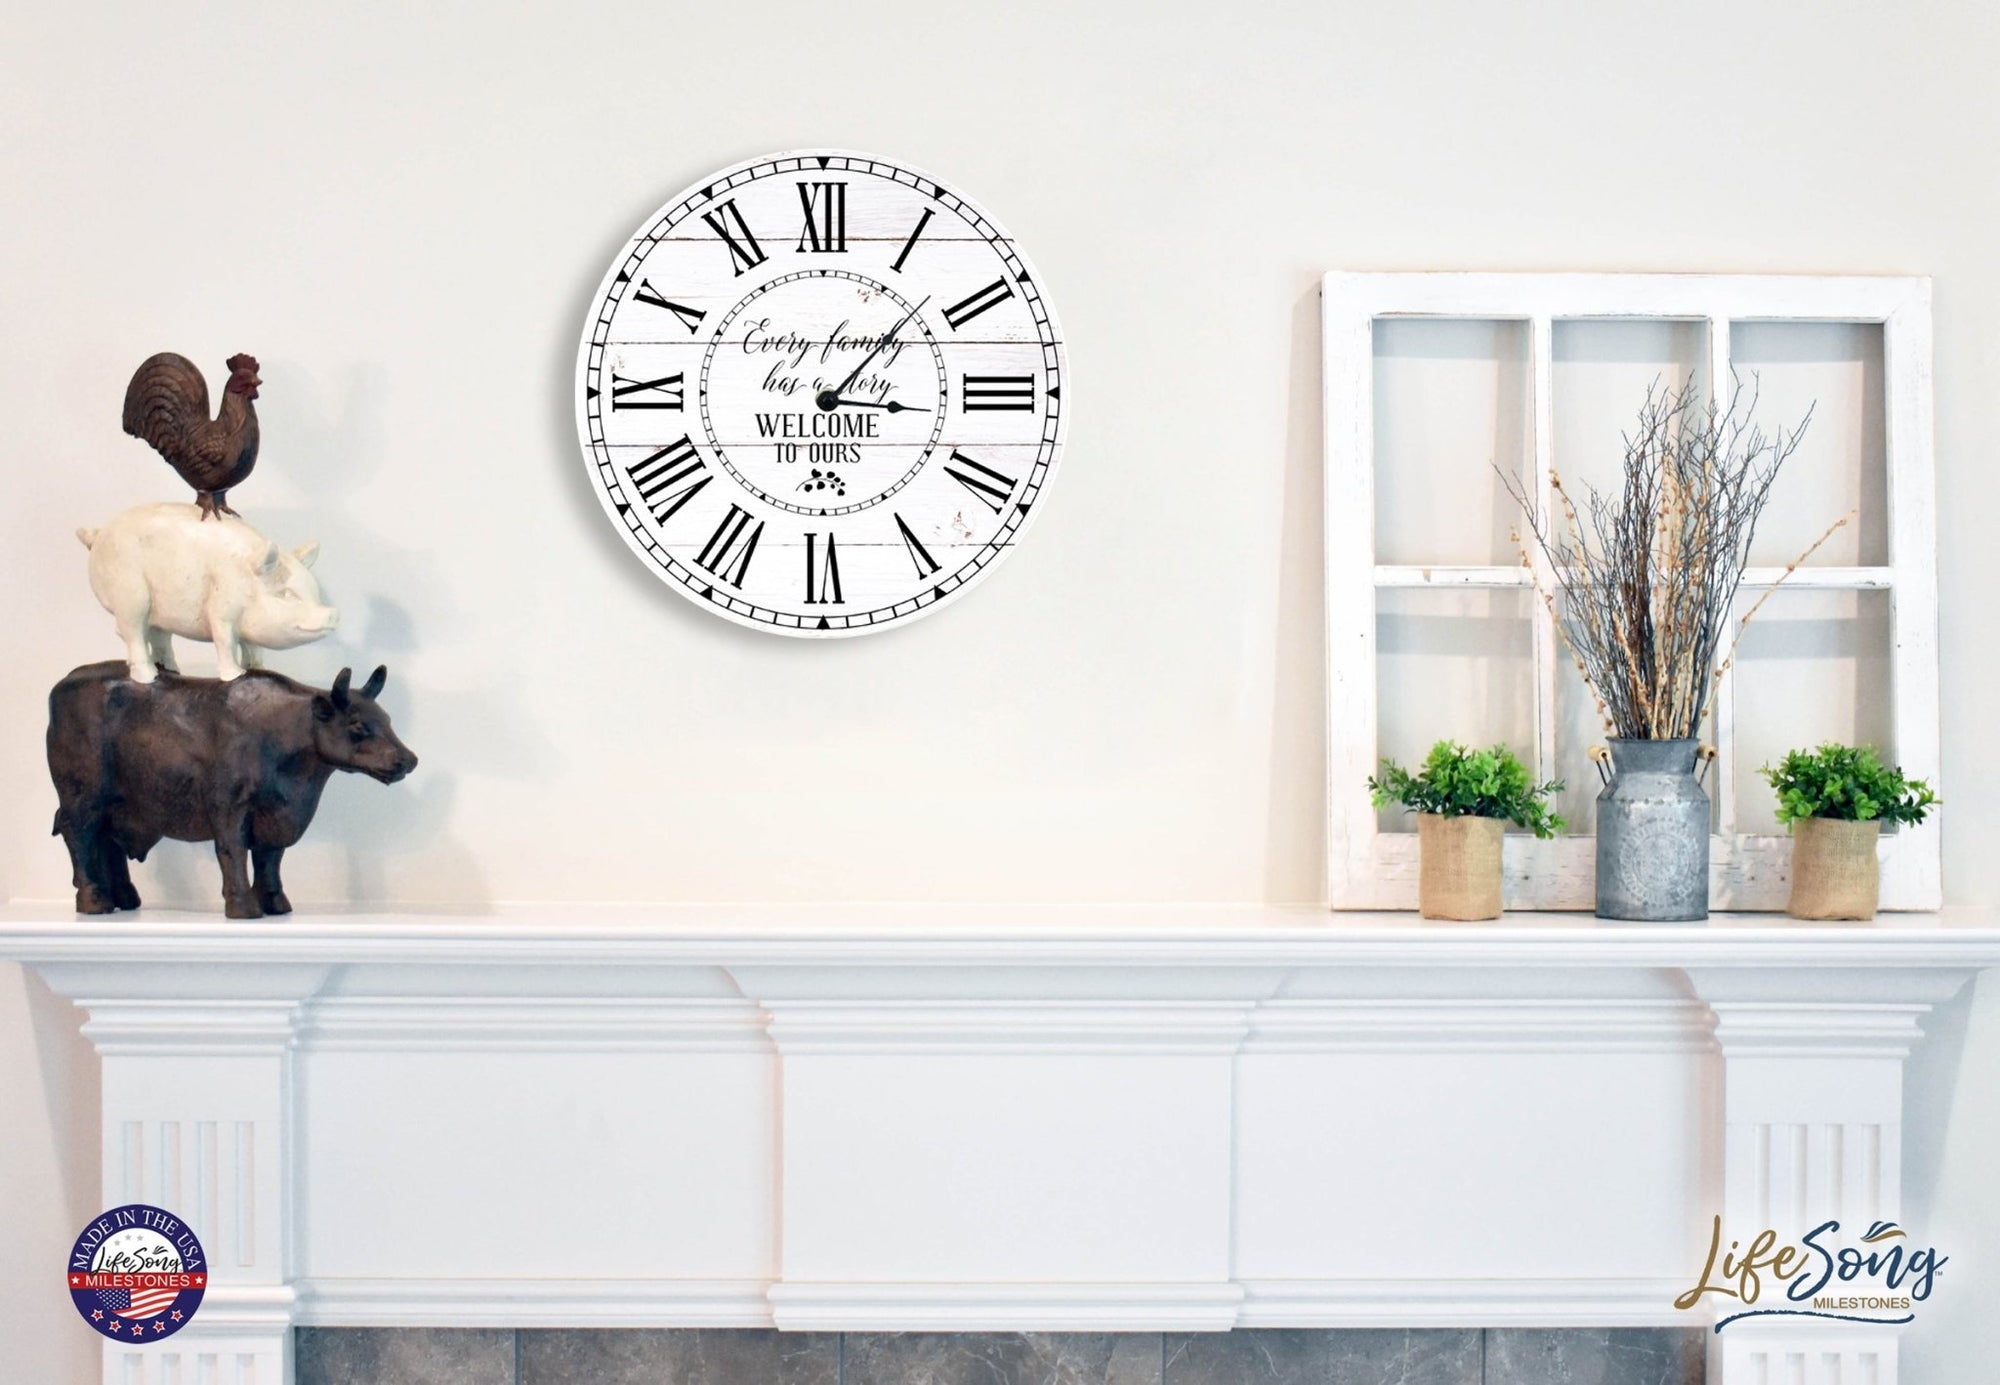 Everyday Home and Family Clock 12” x .0125” Every Family Has - LifeSong Milestones